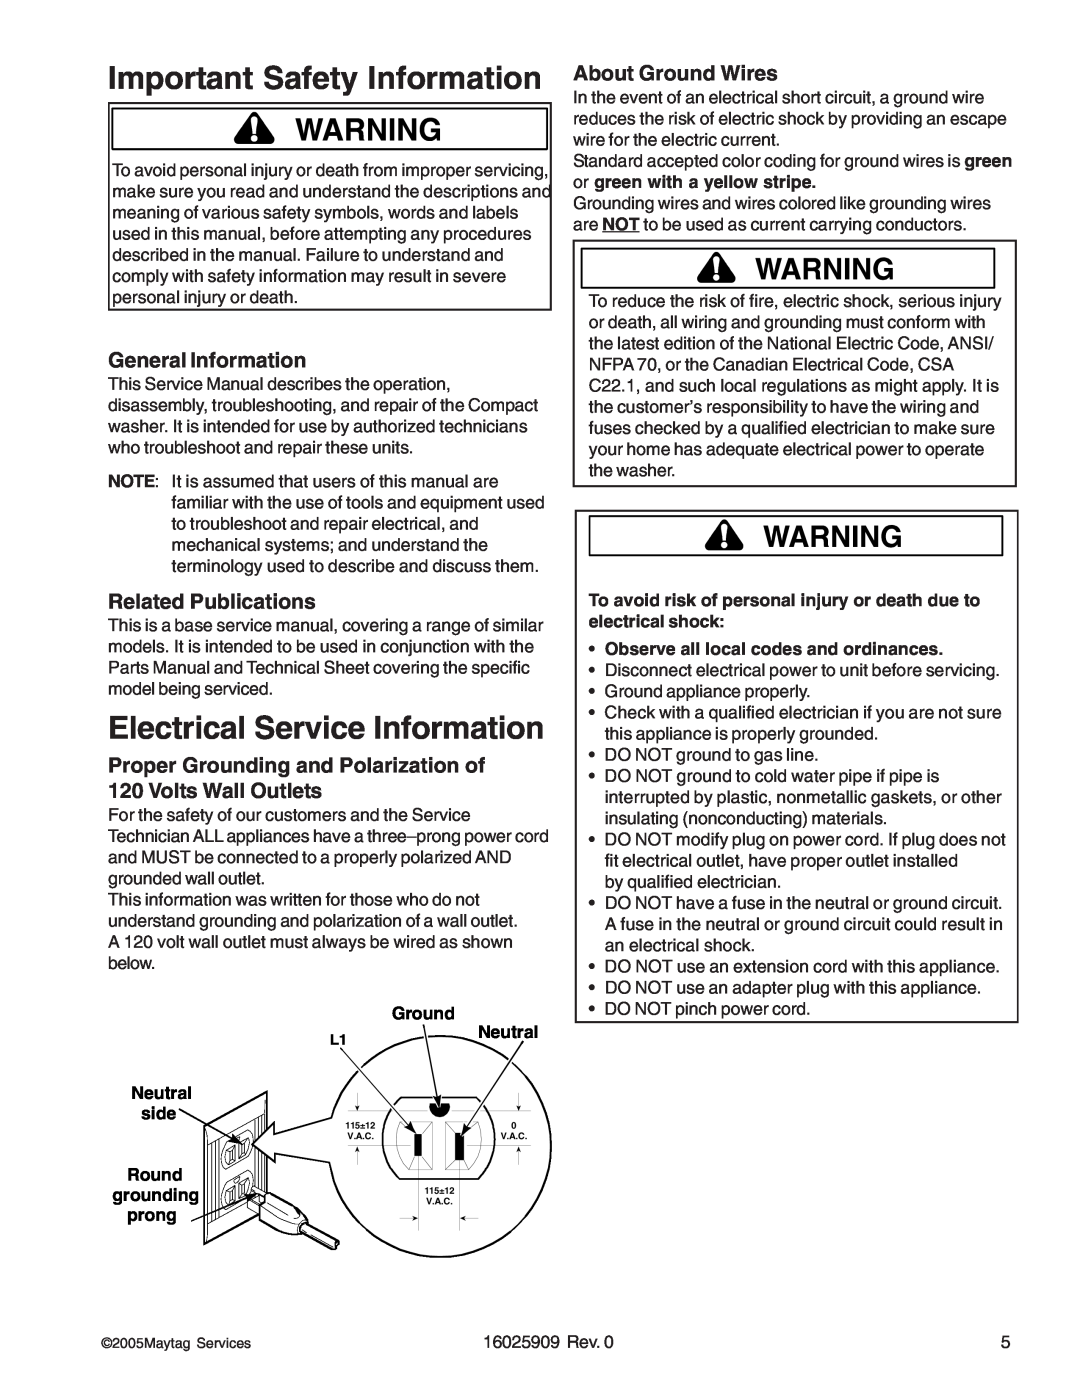 Whirlpool MAH9700AW manual Electrical Service Information, General Information, Related Publications, About Ground Wires 